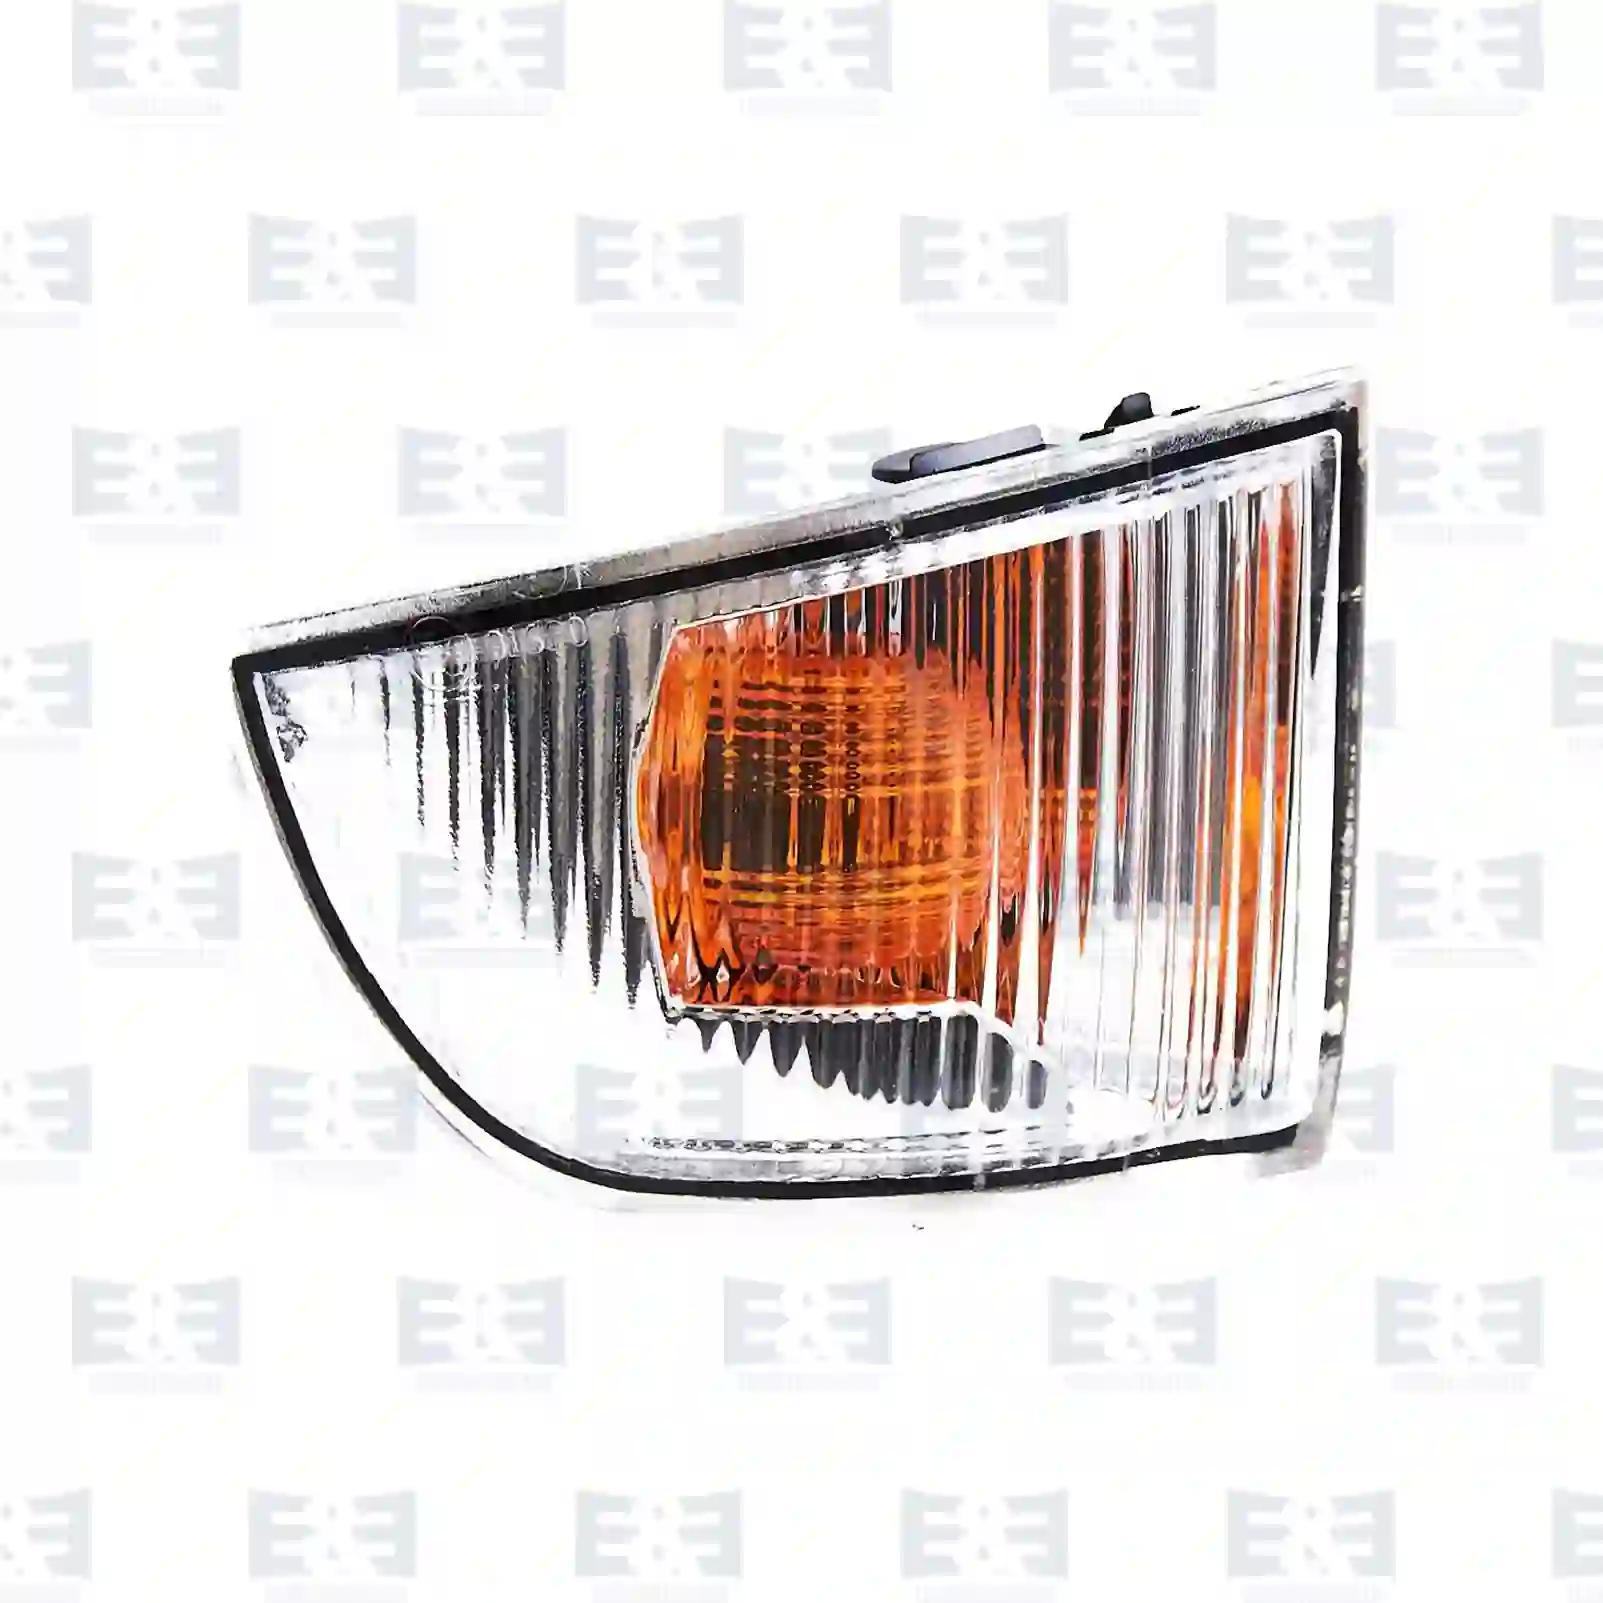 Turn signal lamp, left, without lamp carrier, 2E2298158, 03801914, 3801914, ZG21199-0008 ||  2E2298158 E&E Truck Spare Parts | Truck Spare Parts, Auotomotive Spare Parts Turn signal lamp, left, without lamp carrier, 2E2298158, 03801914, 3801914, ZG21199-0008 ||  2E2298158 E&E Truck Spare Parts | Truck Spare Parts, Auotomotive Spare Parts